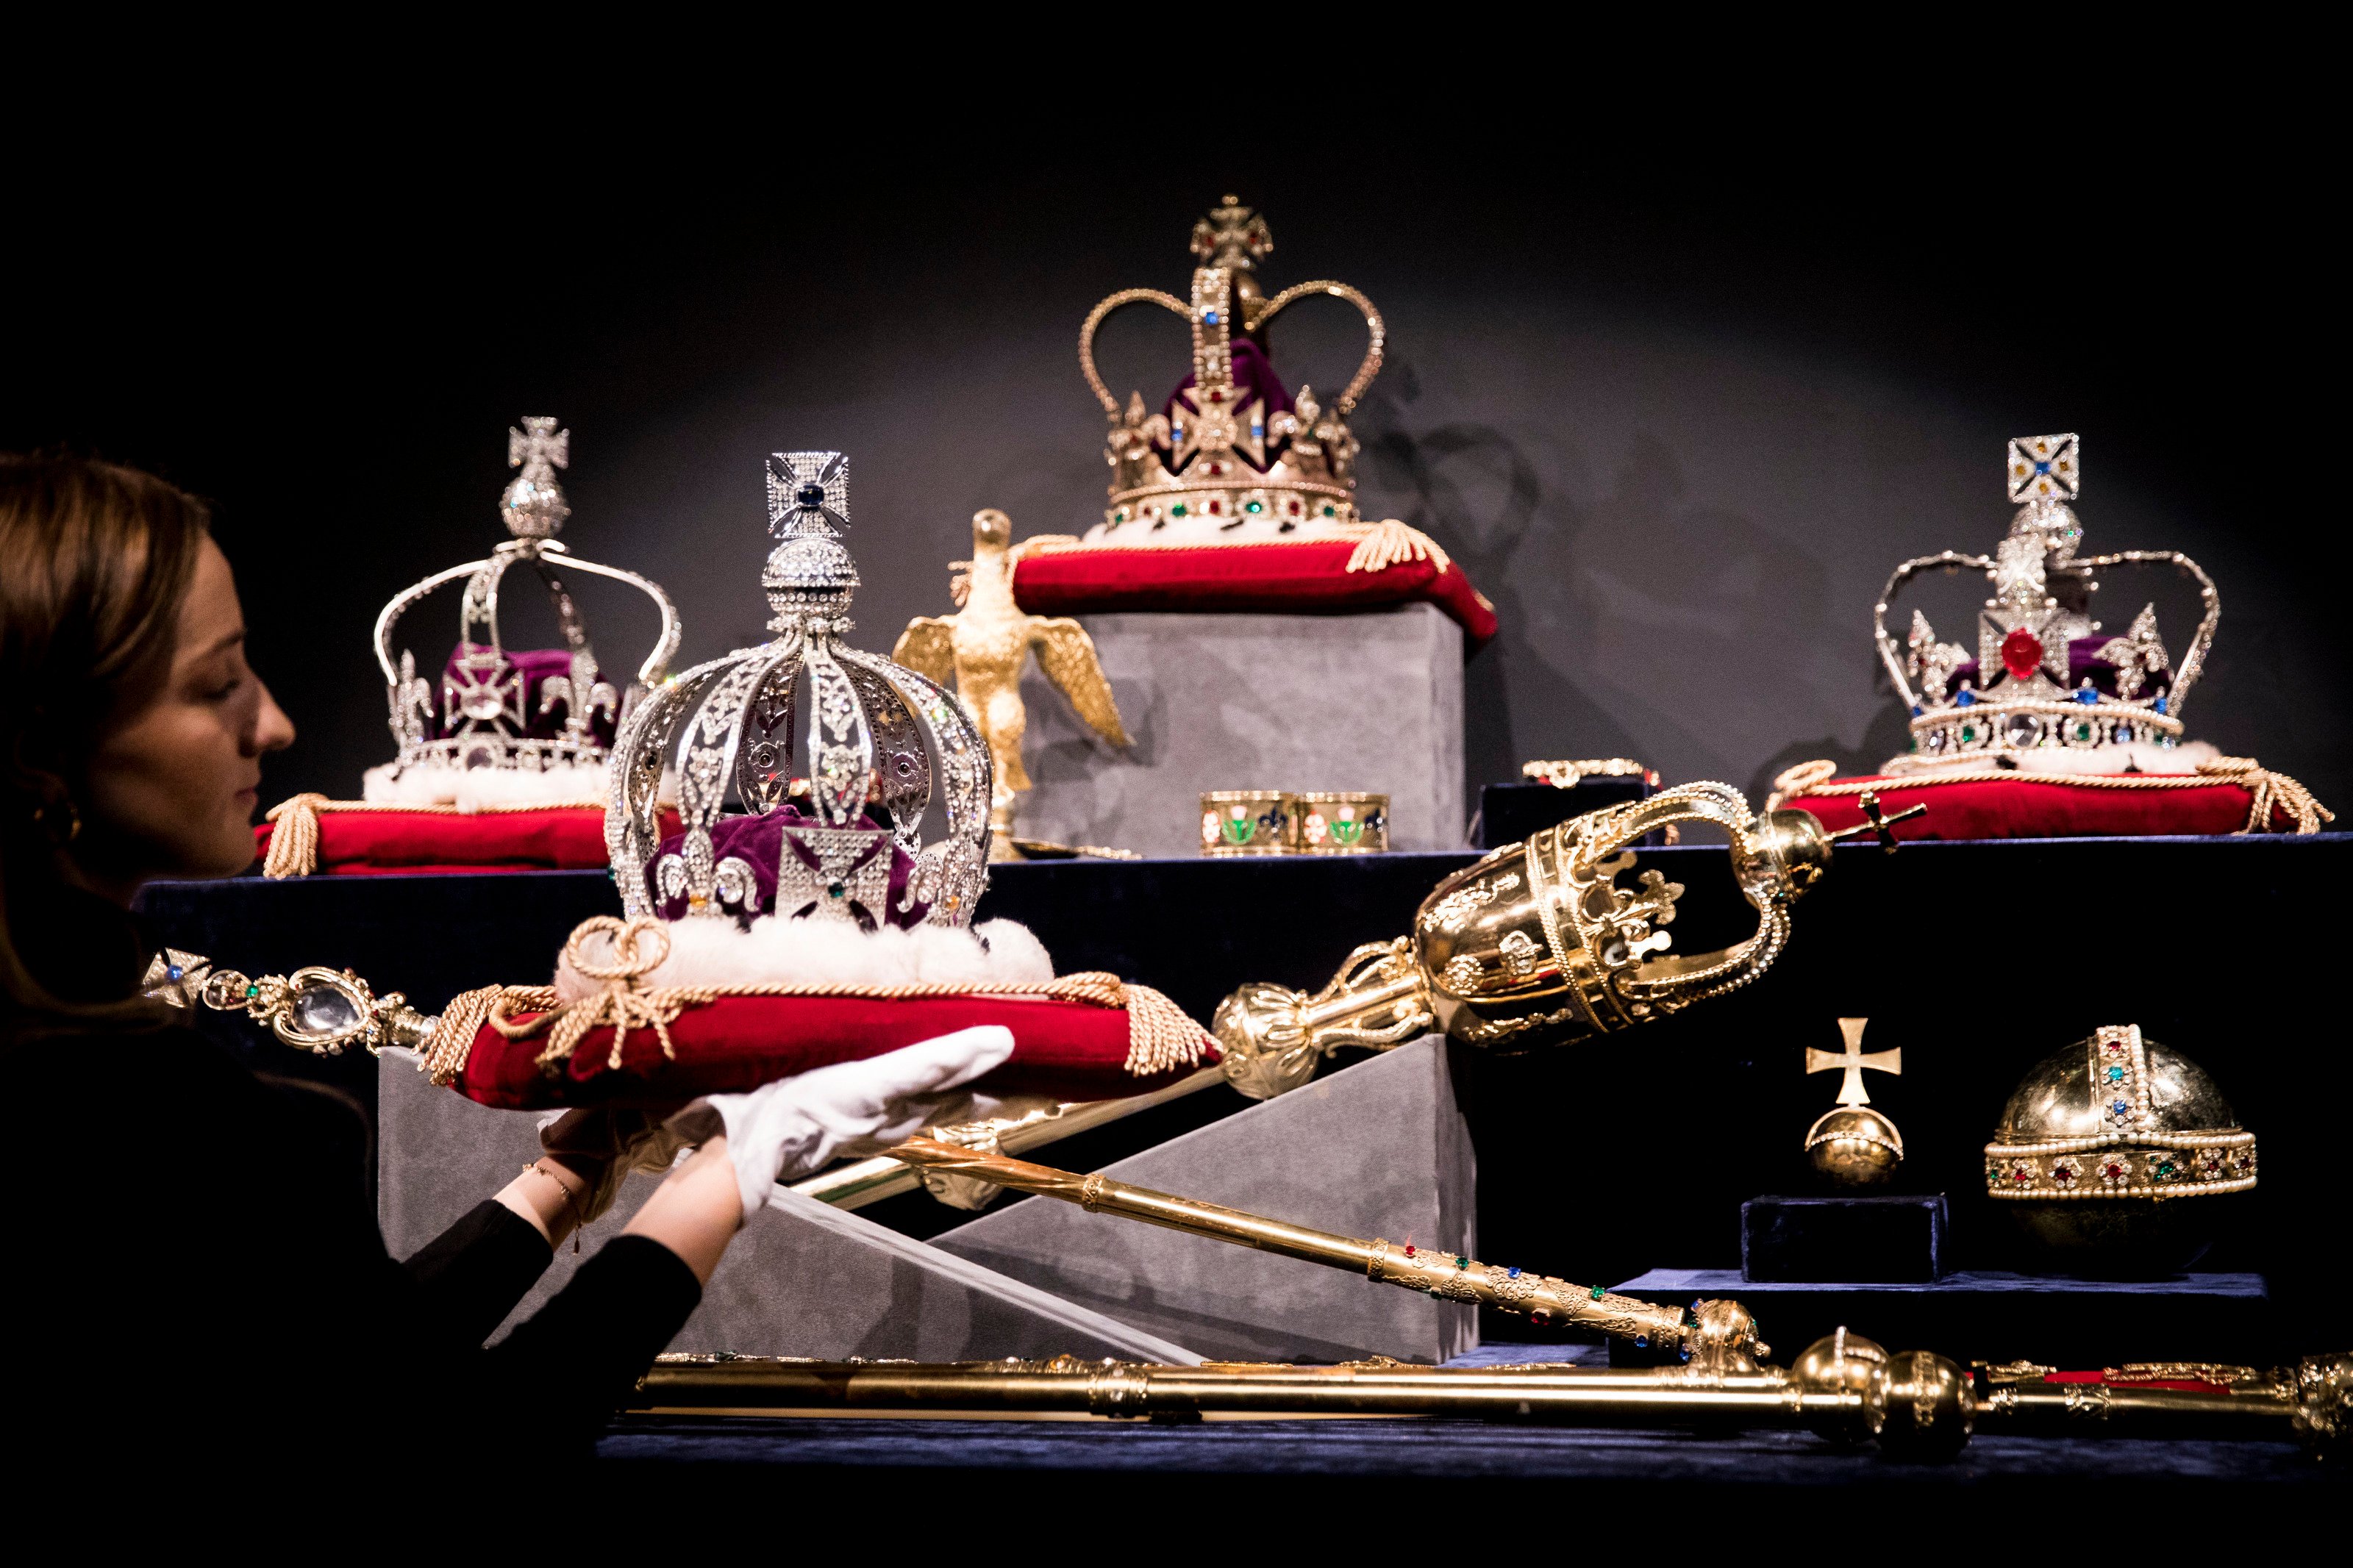 One of the replica sets of the British Crown Jewels made for Queen Elizabeth’s coronation in 1953, on display at Sotheby’s London in January 2018, ahead of being auctioned off. Photo: Getty Images